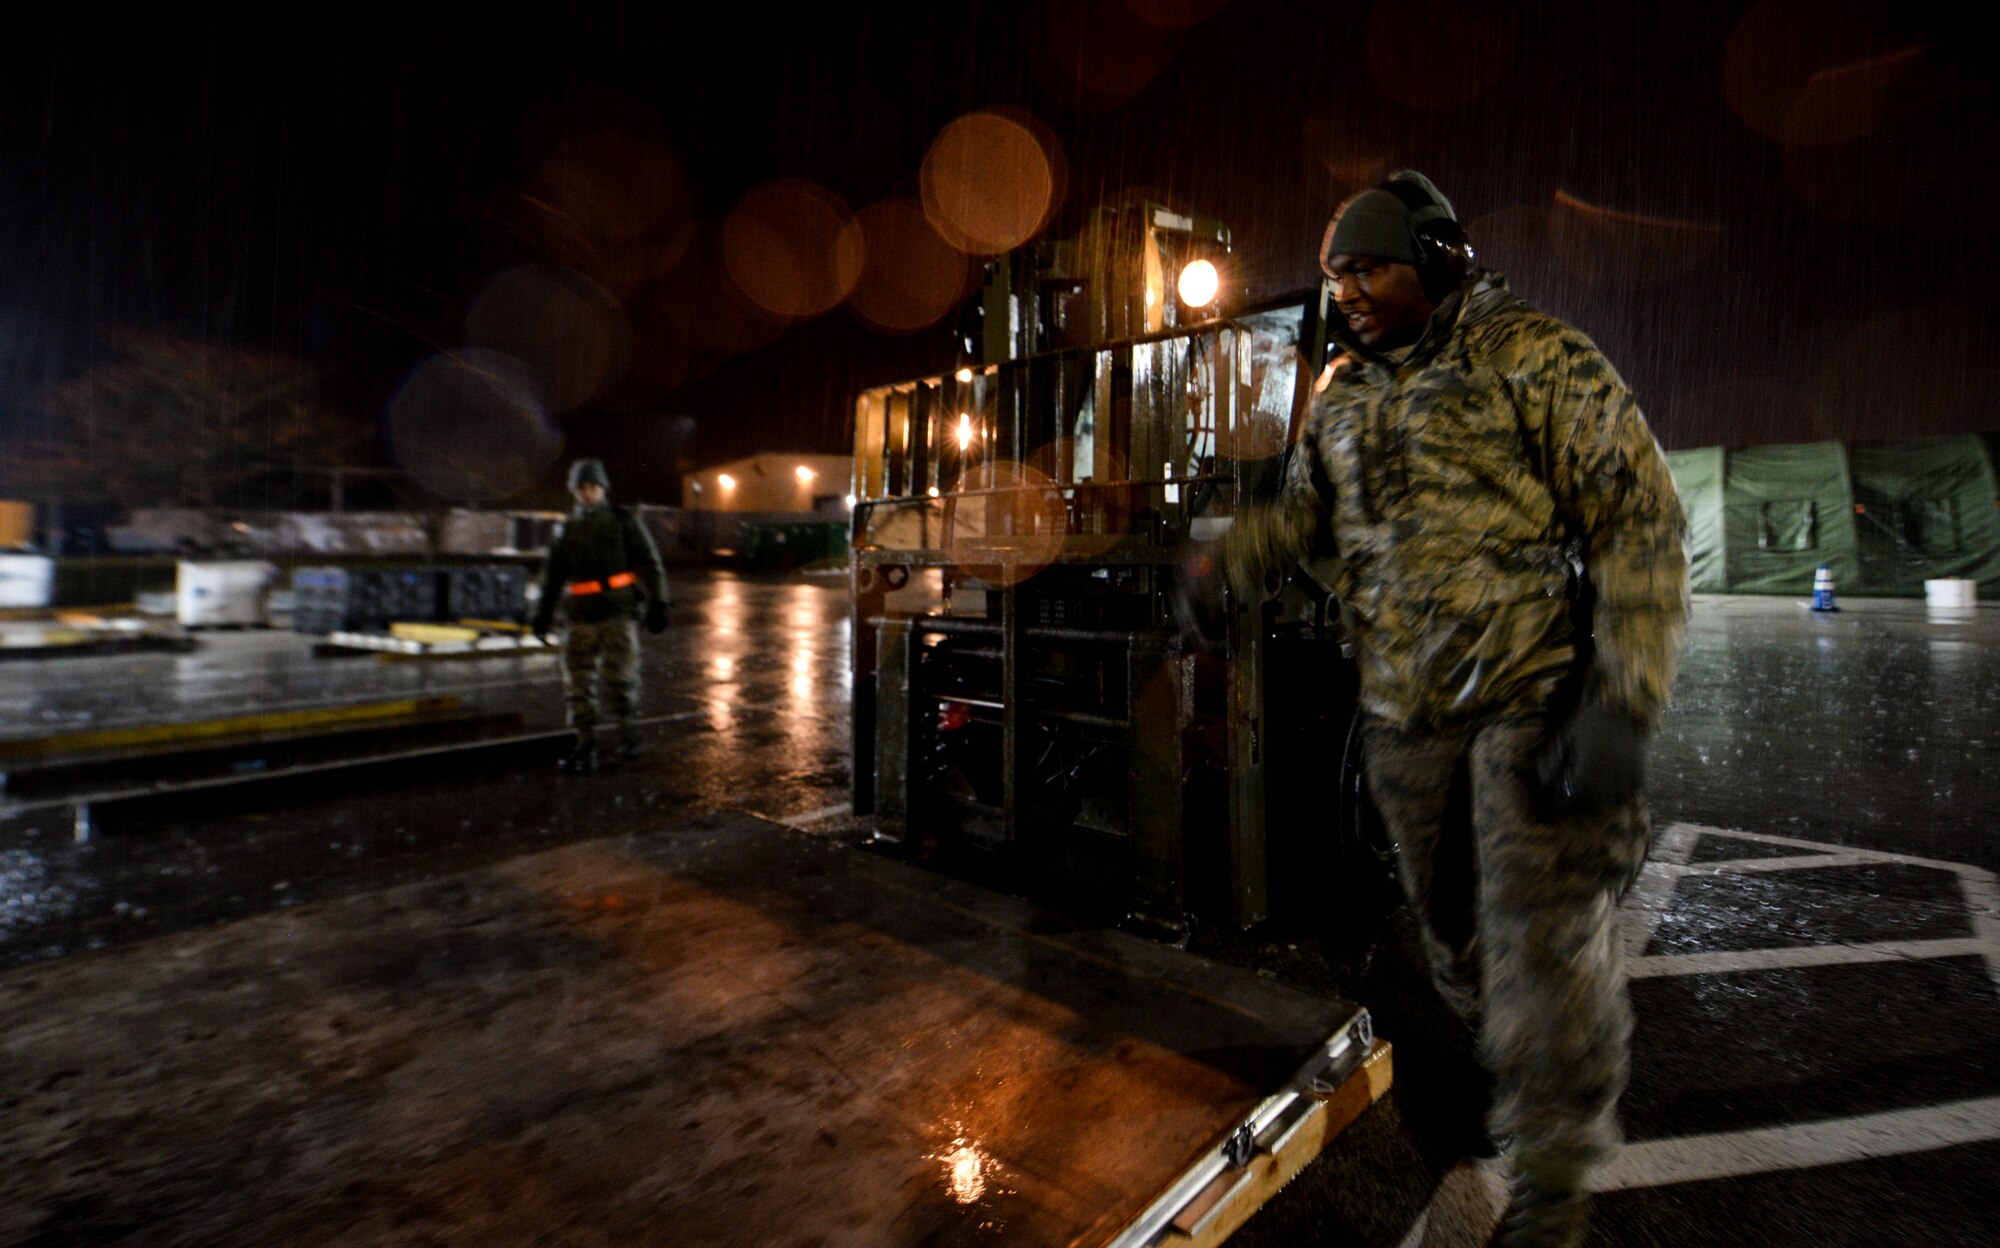 Airman 1st Class Andrew Winters, 375th Logistics Readiness Squadron air transportation specialist, directs Airman 1st Class Anthony Redshaw, 375th LRS vehicle maintenance specialist, while moving pallets during a mobility exercise on Scott Air Force Base, Illinois, Jan. 23, 2019. Along with personnel, members of the 375th LRS’s ground and air transportation crews are responsible for all loading and unloading of cargo that Airmen would need in a deployed location.  This cargo can include medical supplies, personnel files, vehicles and bare base equipment.